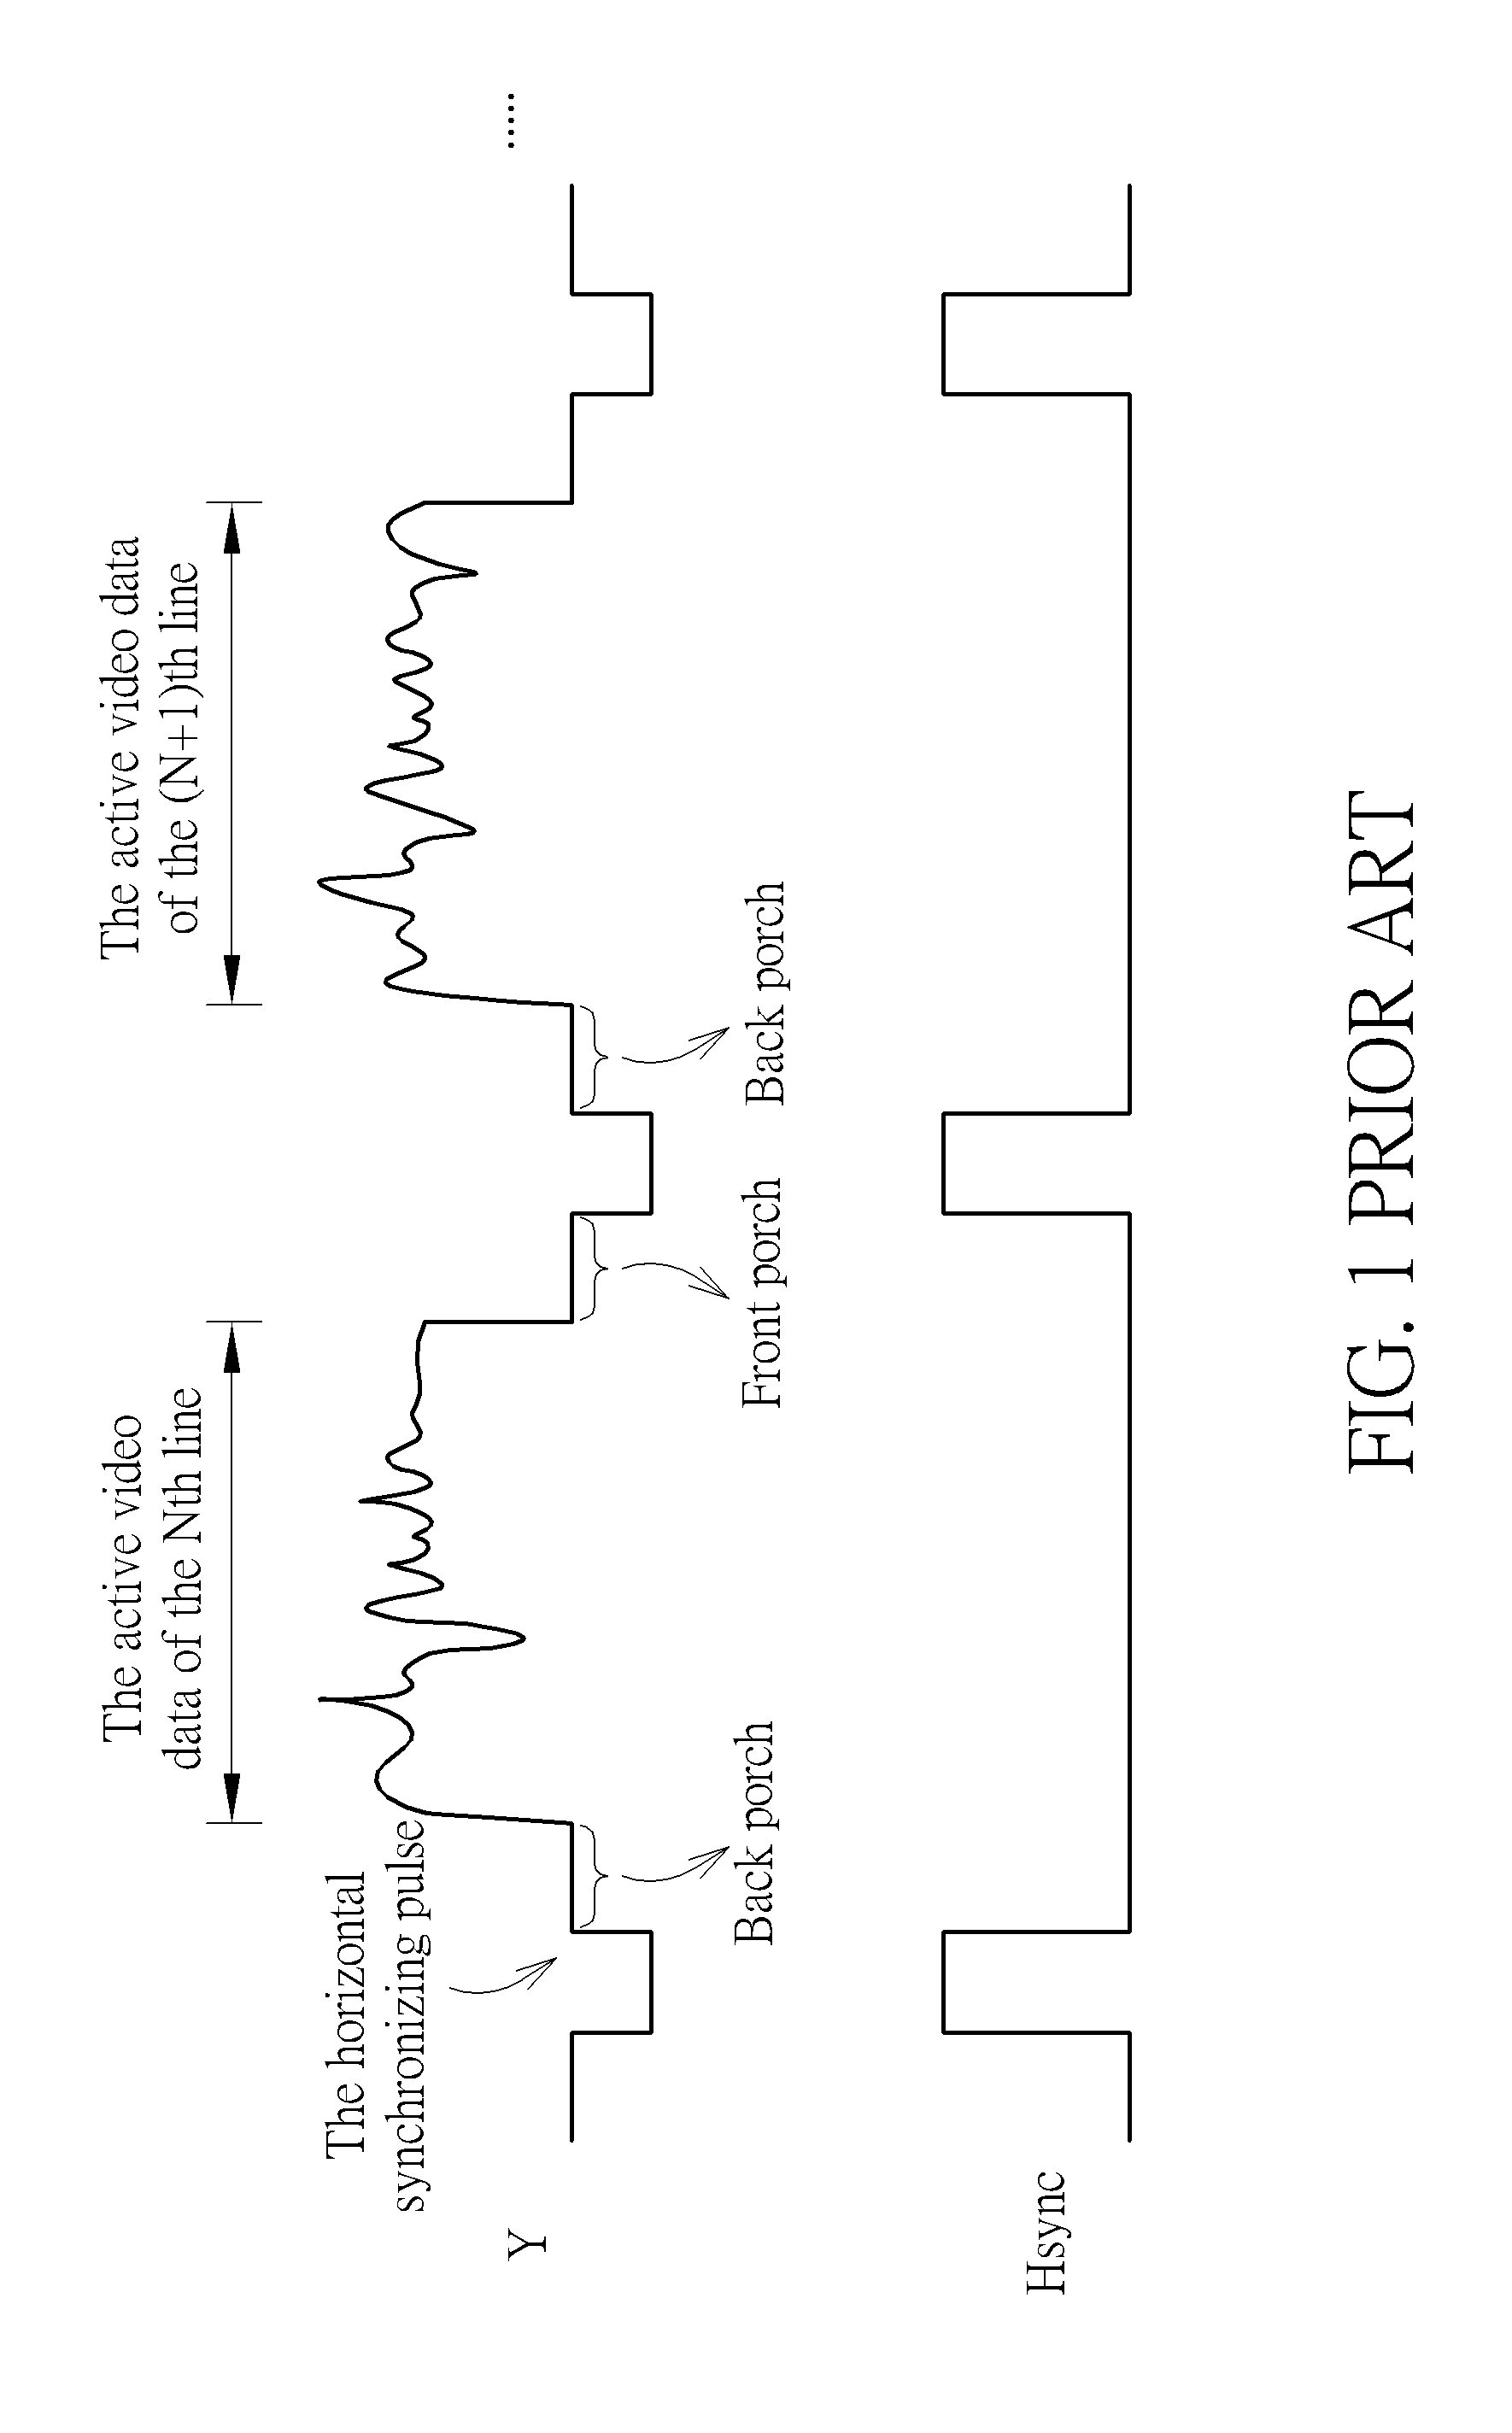 Circuit for generating horizontal synchronizing signal of display and associated method